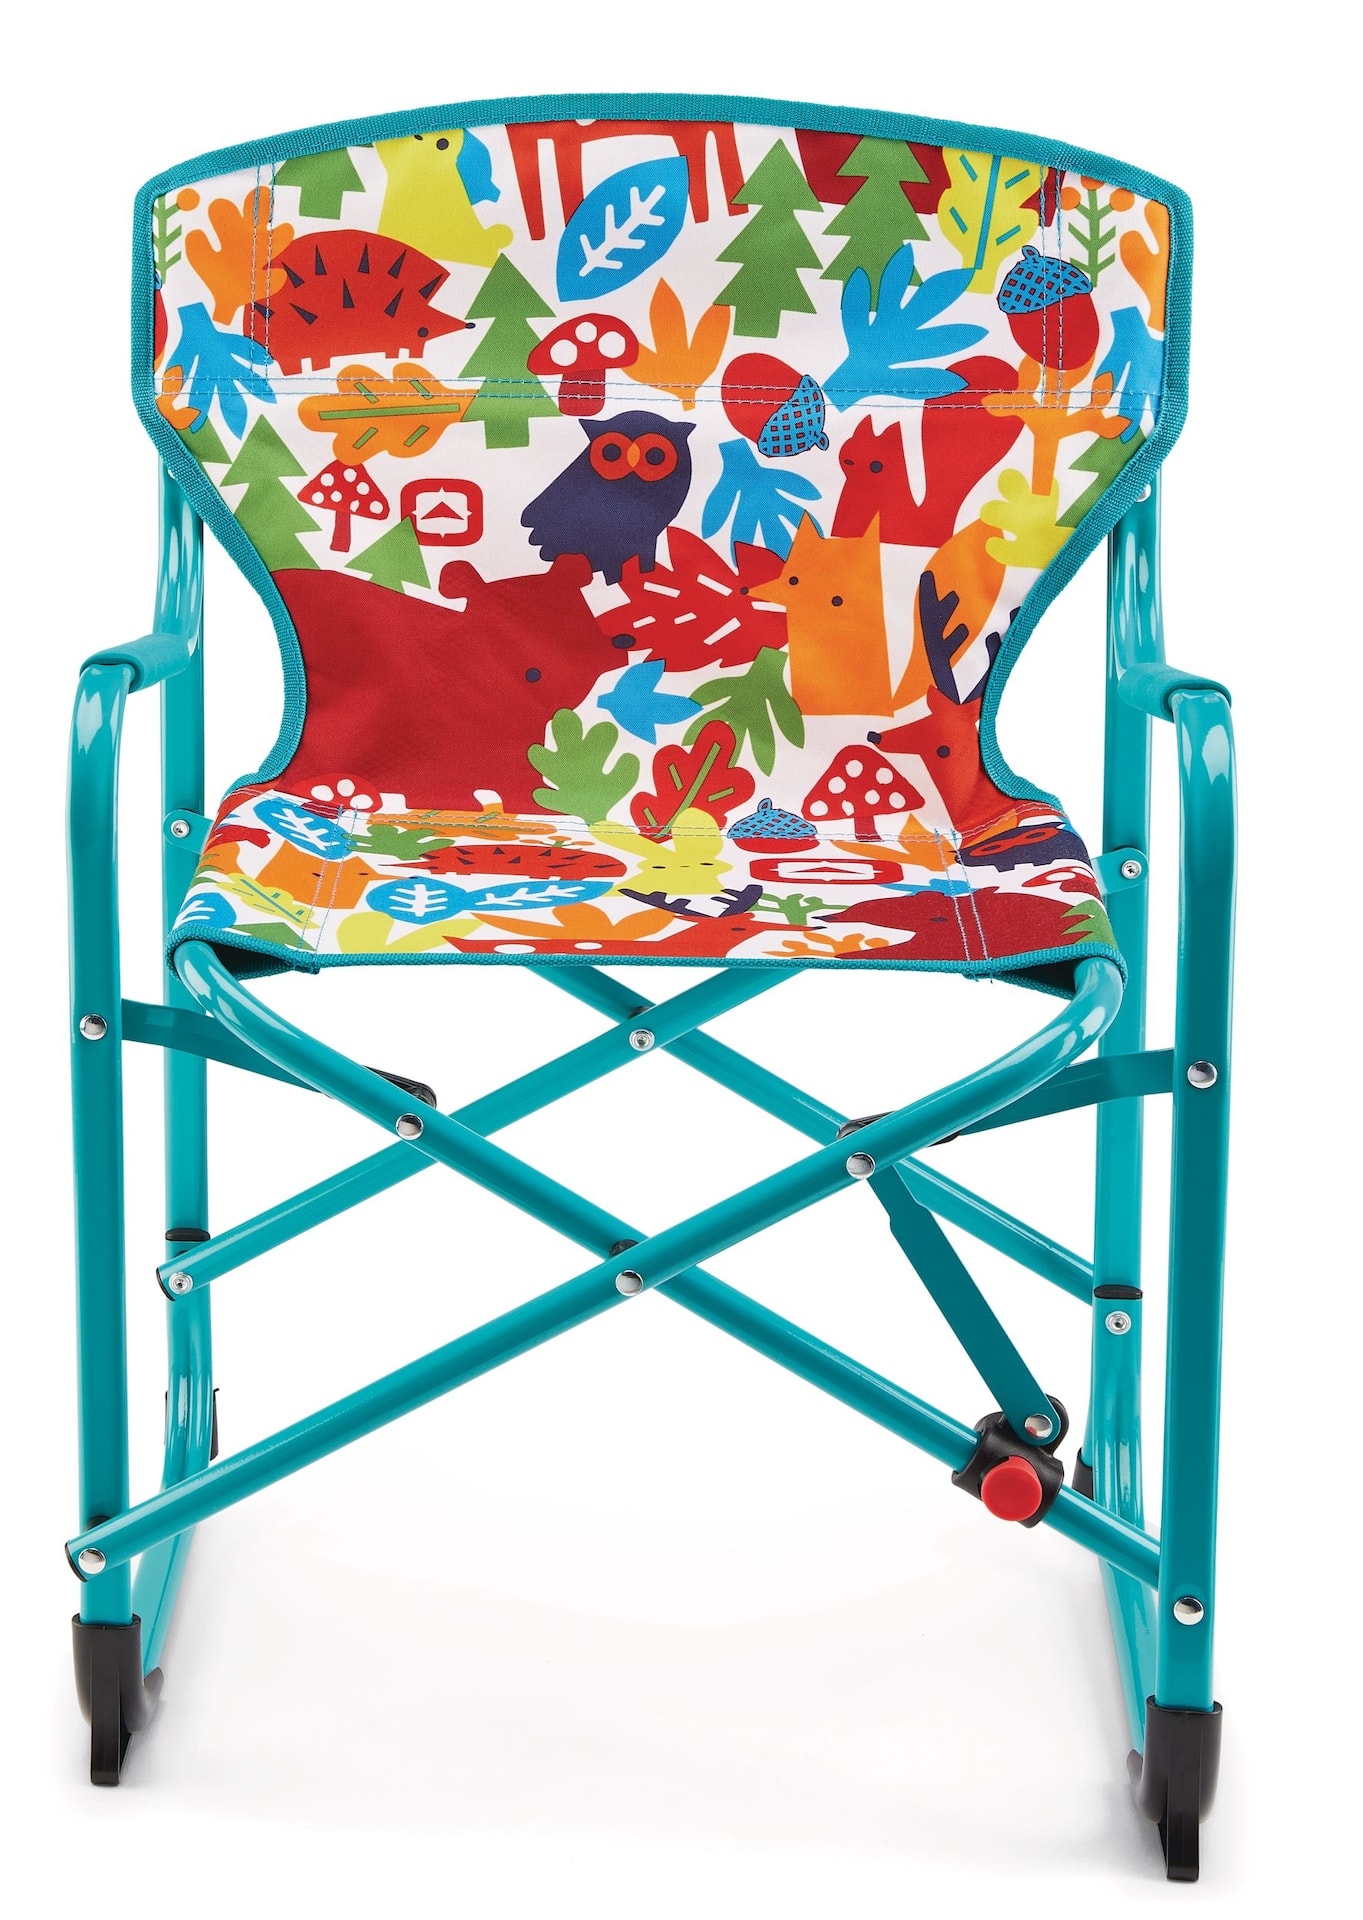 https://media-www.canadiantire.ca/product/playing/camping/camping-furniture/0766187/outbound-kids-folding-director-chair-34ecdf63-0c04-462f-8177-1a28fddbda6d-jpgrendition.jpg